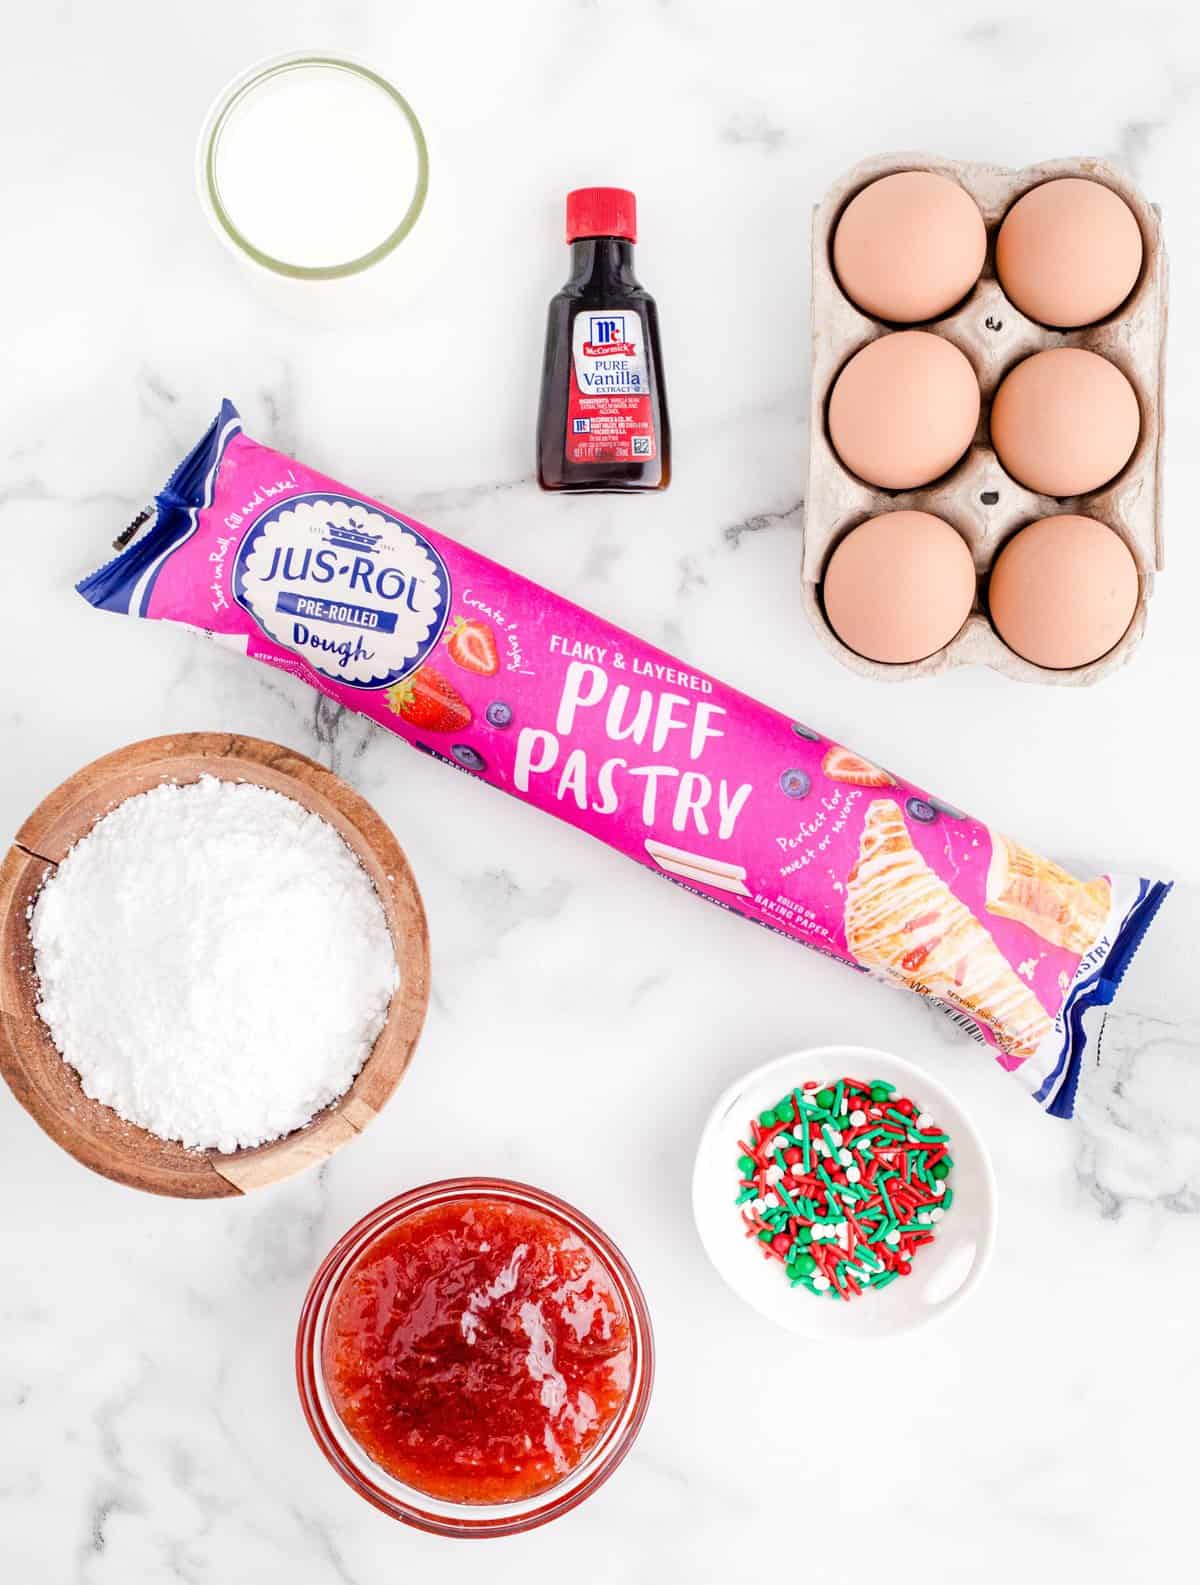 Ingredients needed: puff pastry, strawberry preserves, egg, powdered sugar, milk, vanilla extract and sprinkles.